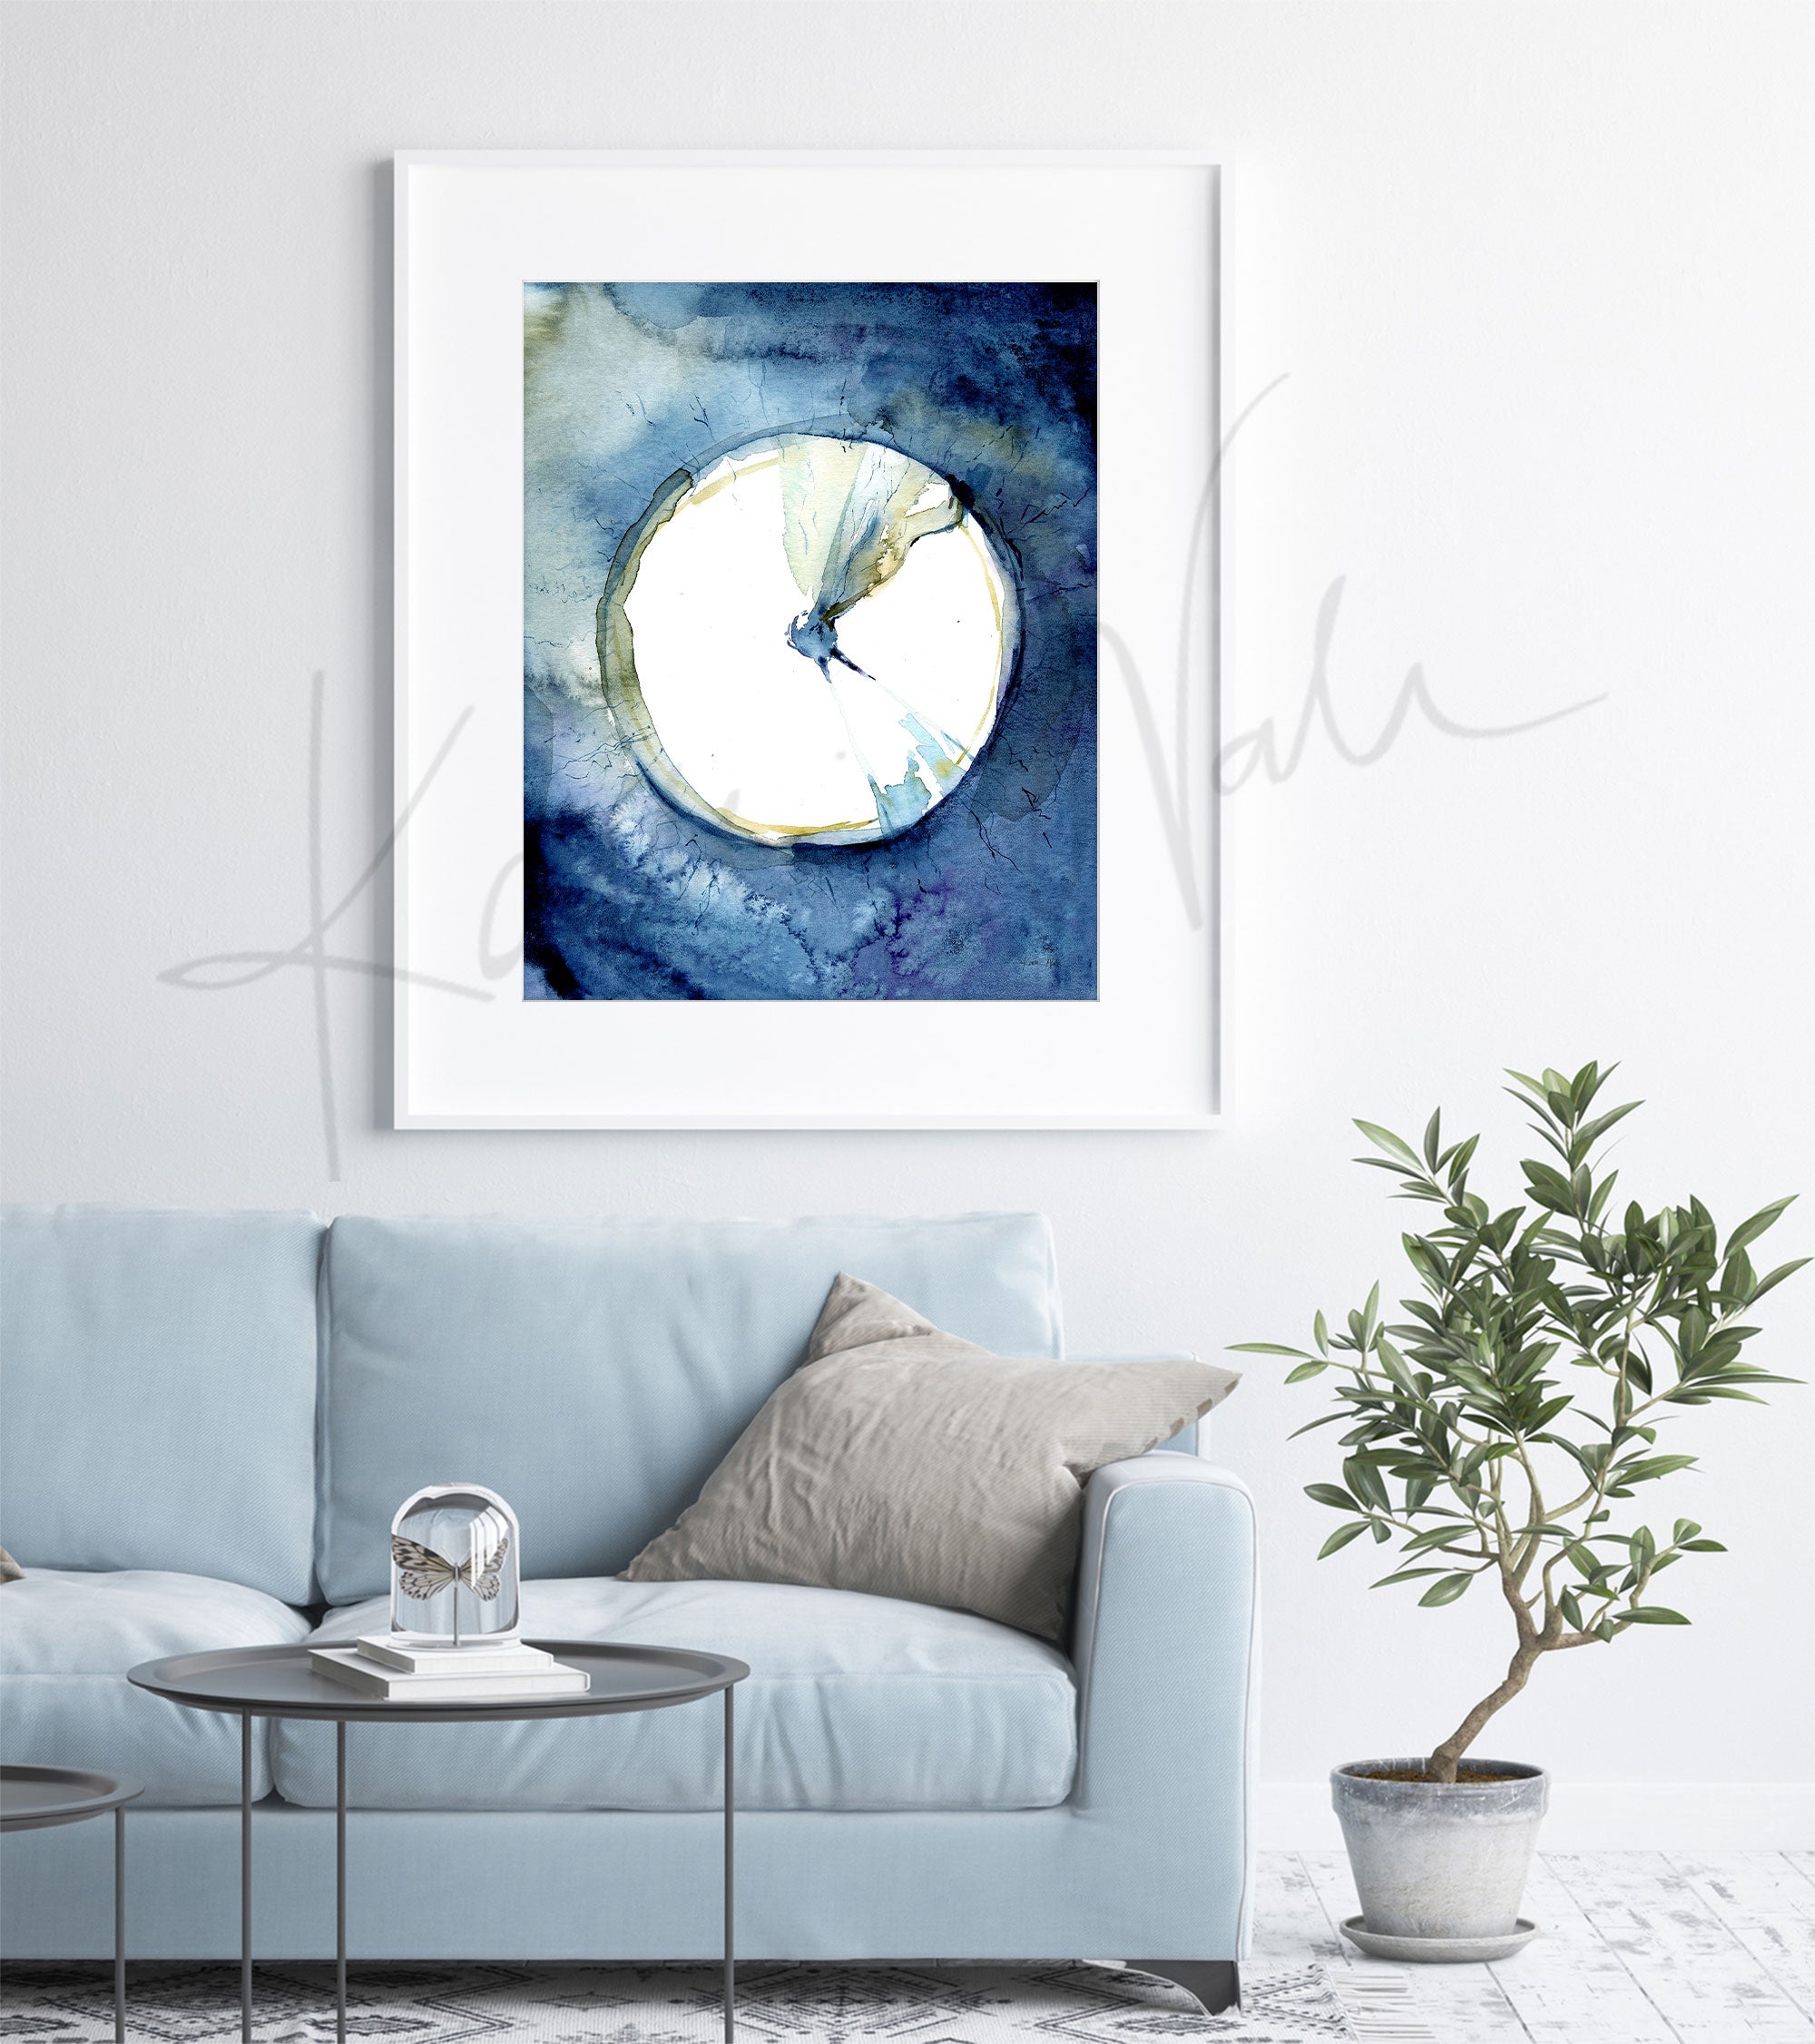 Framed watercolor painting of an eardrum. The painting is hanging over a blue couch.